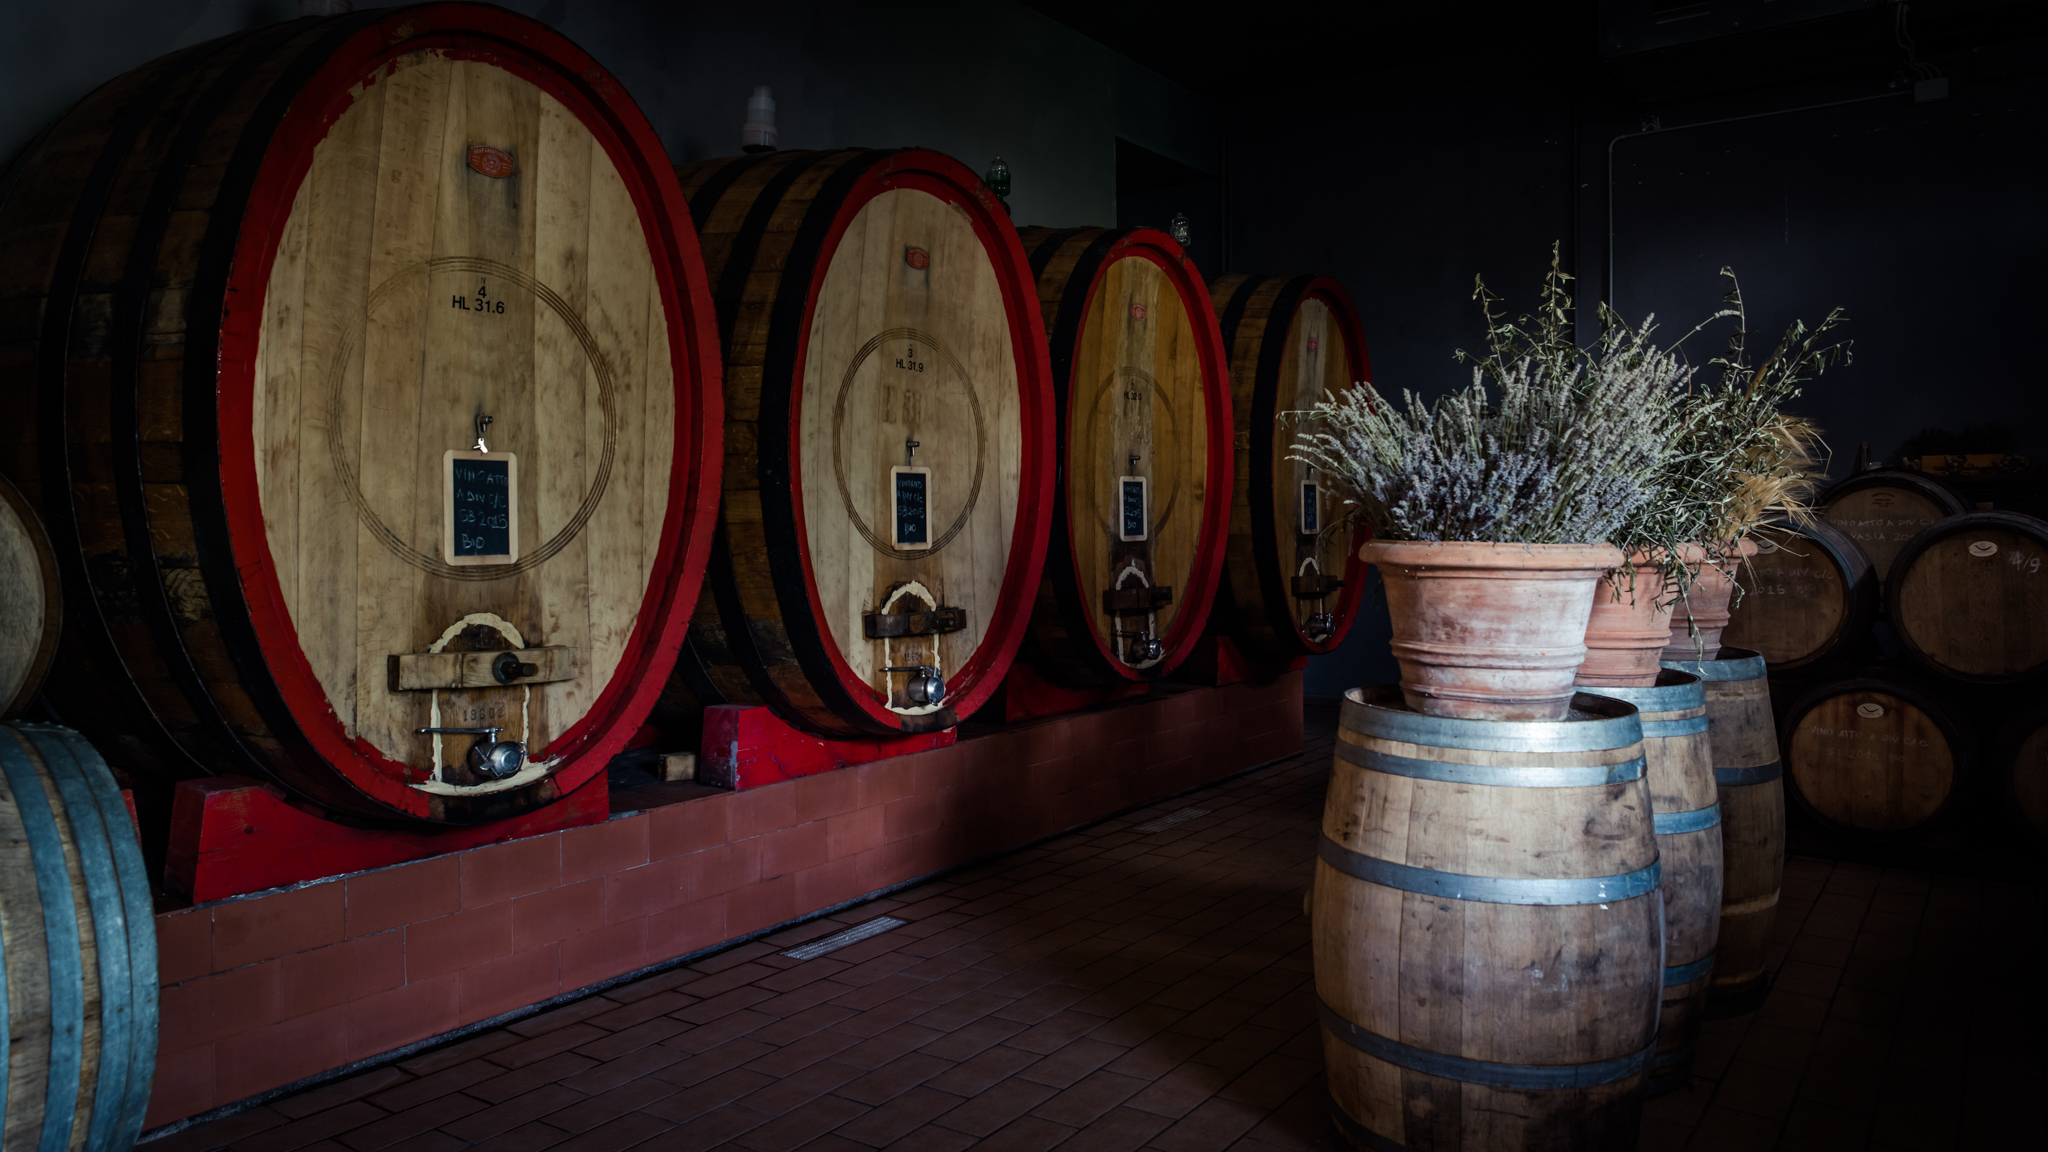 oak barrels as used for the wine making and aging process